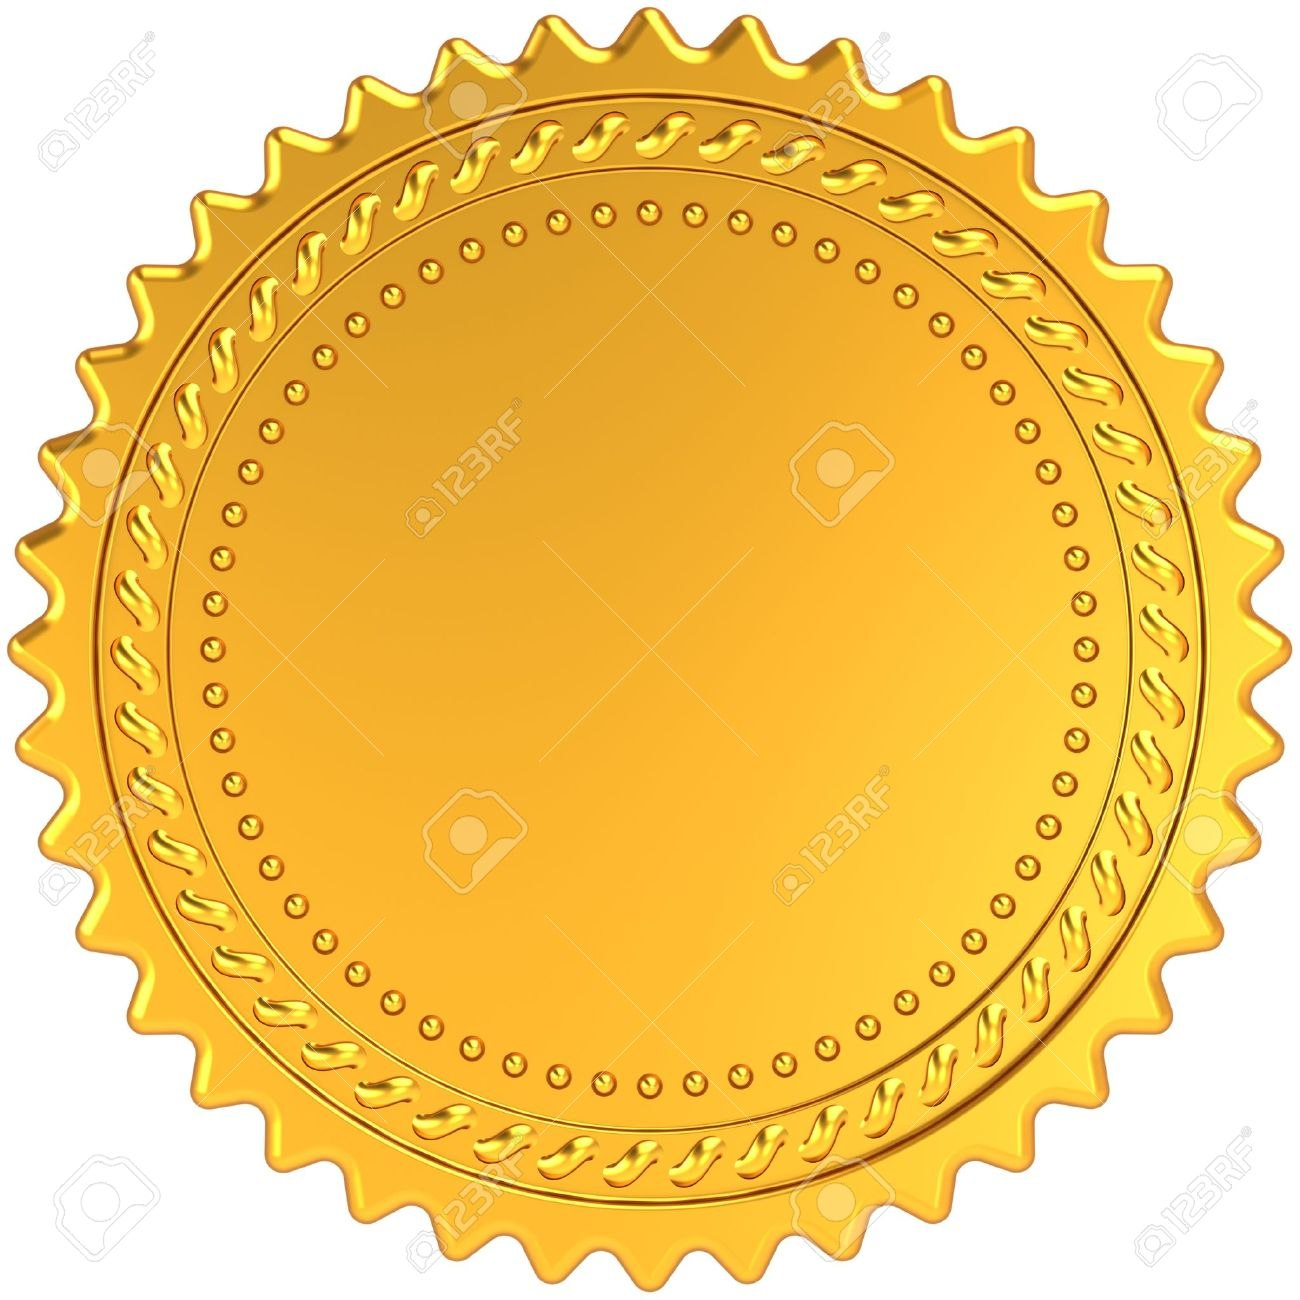 Golden Award Medal Blank Seal Luxury Champion Badge Label in Blank Seal Template